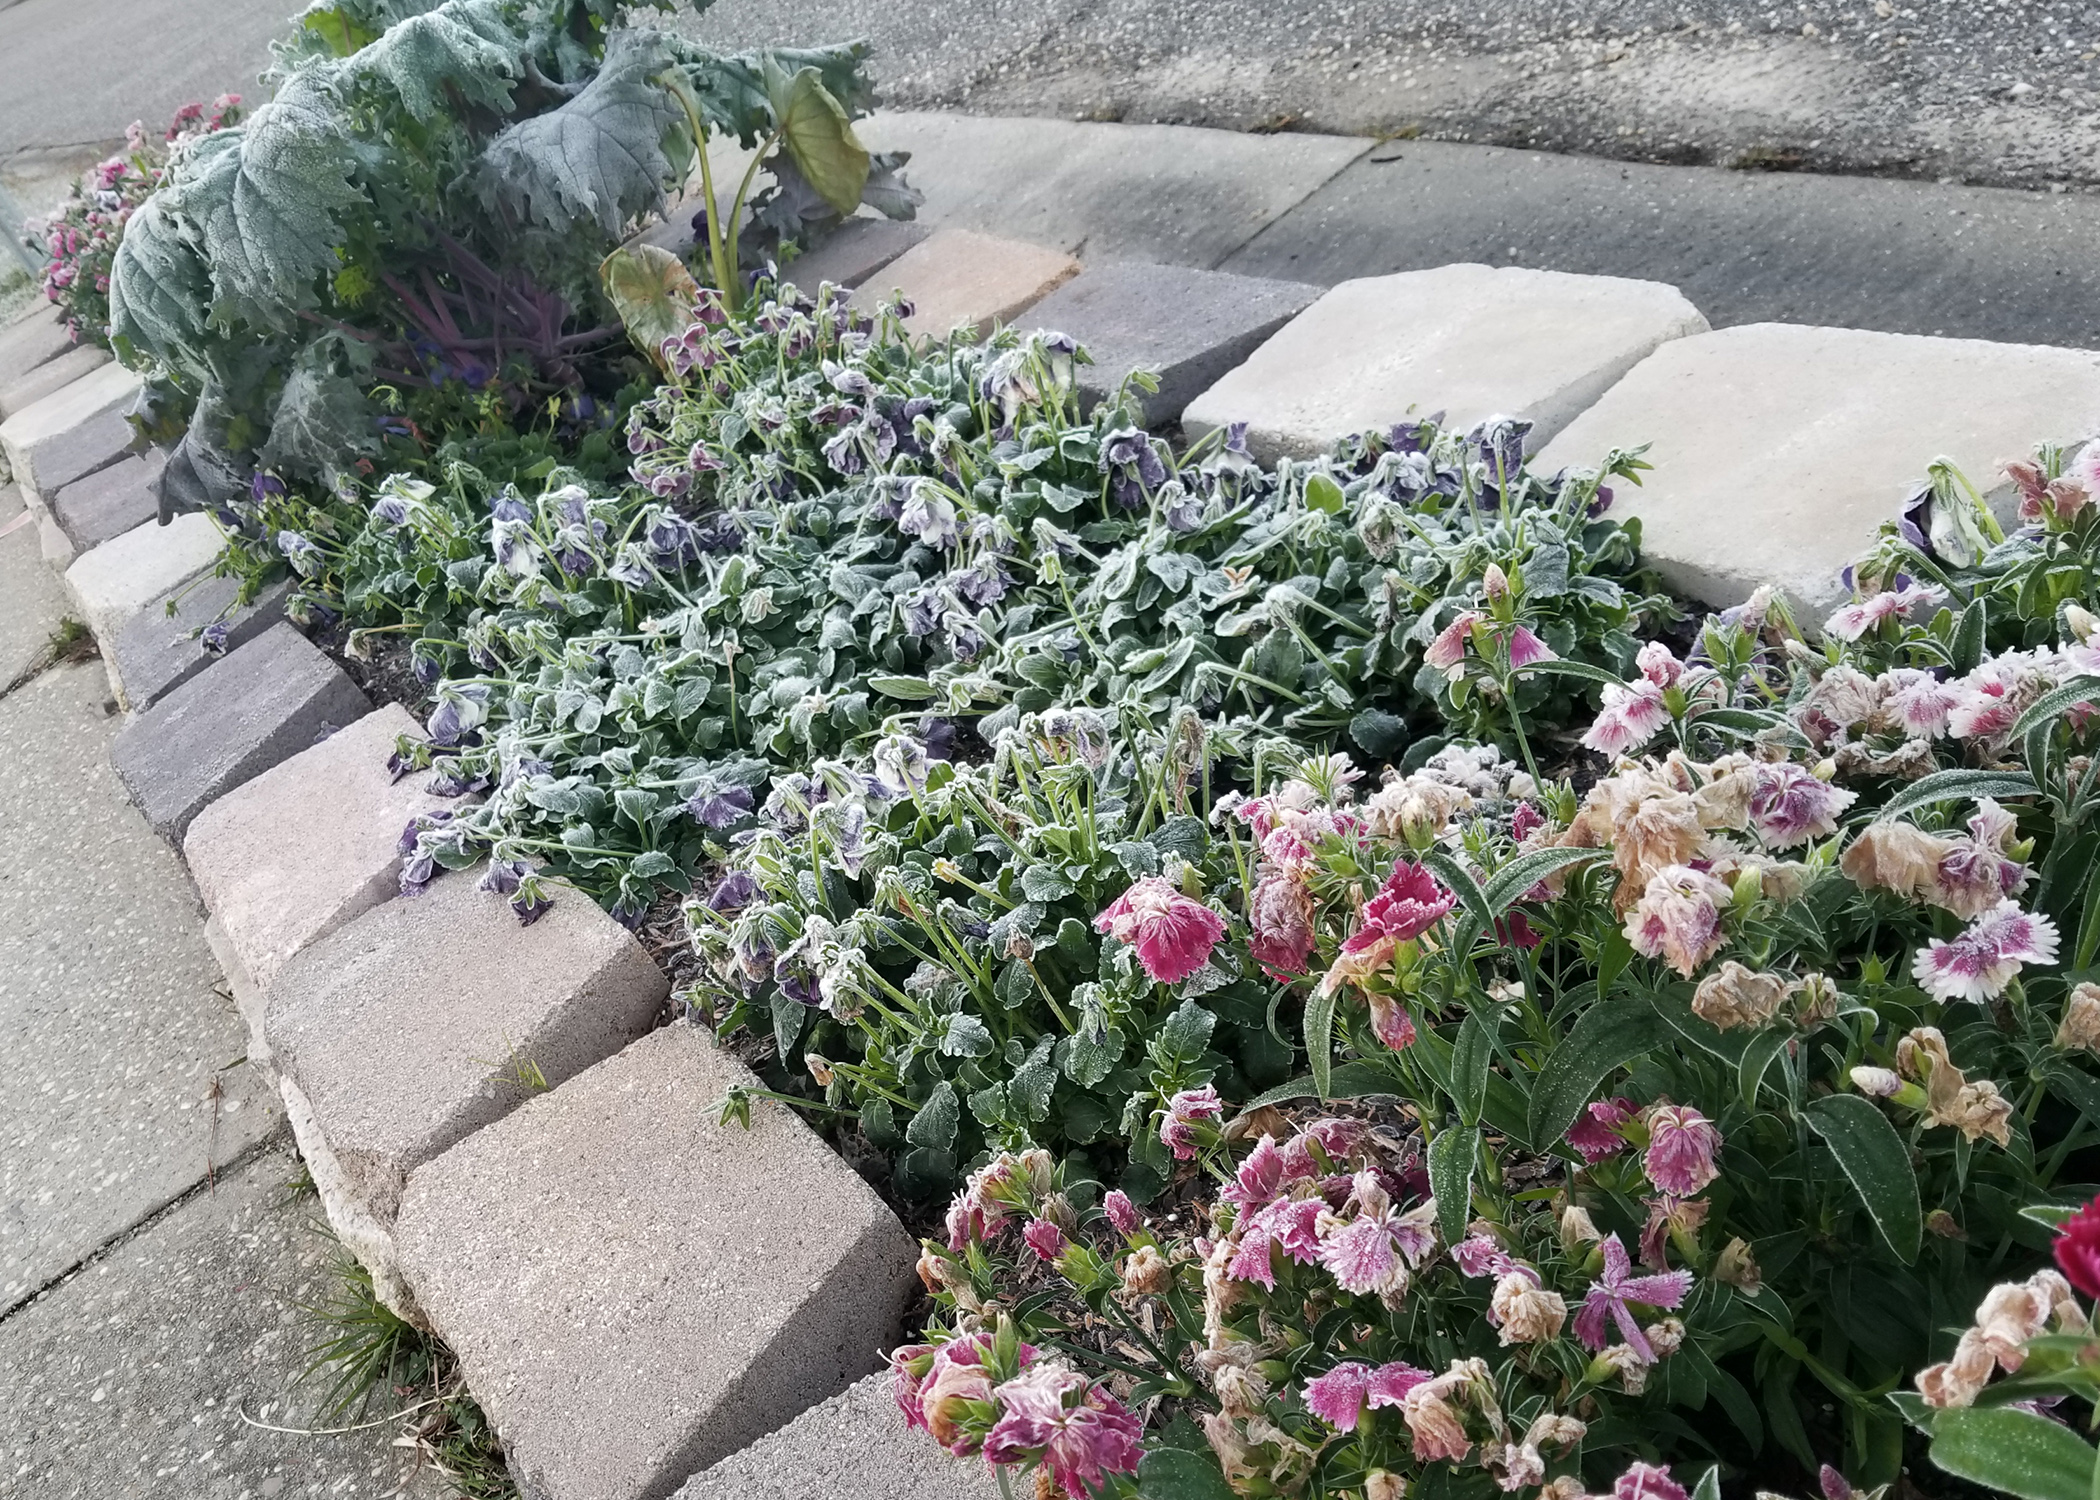 A row of winter flowers bordered by  landscape stones is covered in a light layer of ice.